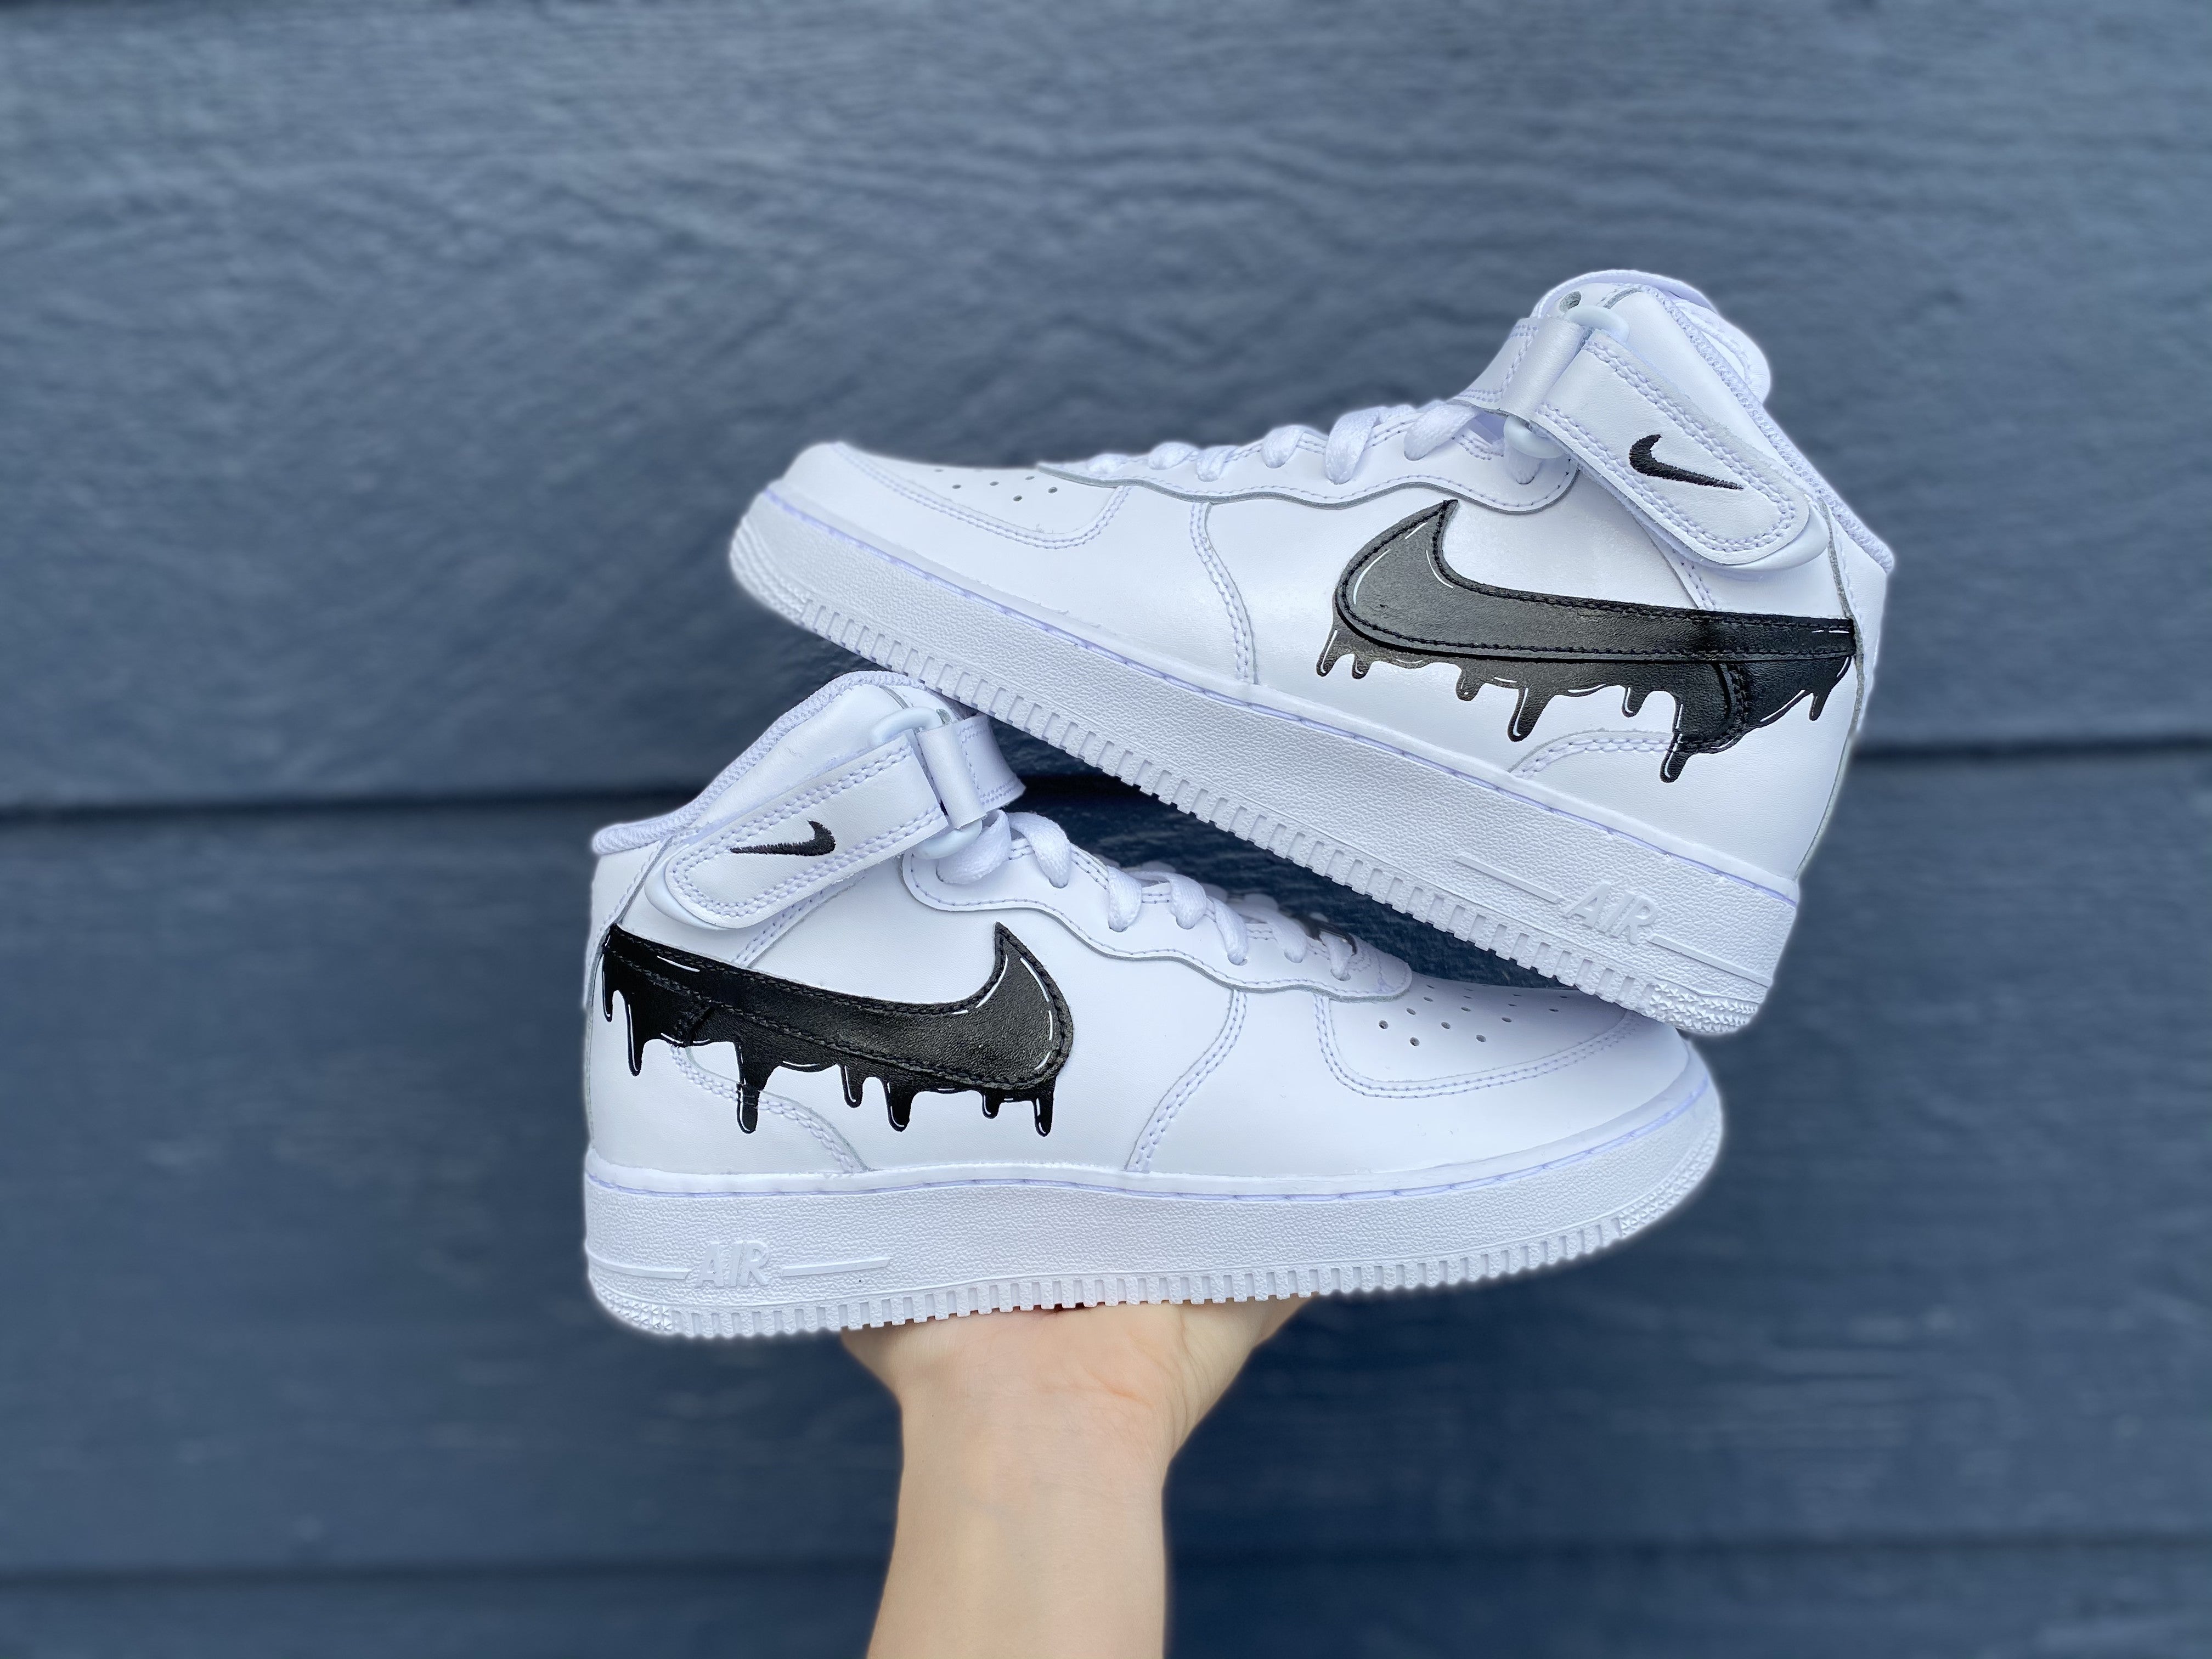 Air Force 1 Custom Low Cartoon Red White Blue Shoes Black Outline All Sizes Af1 Sneakers 2Y Kids